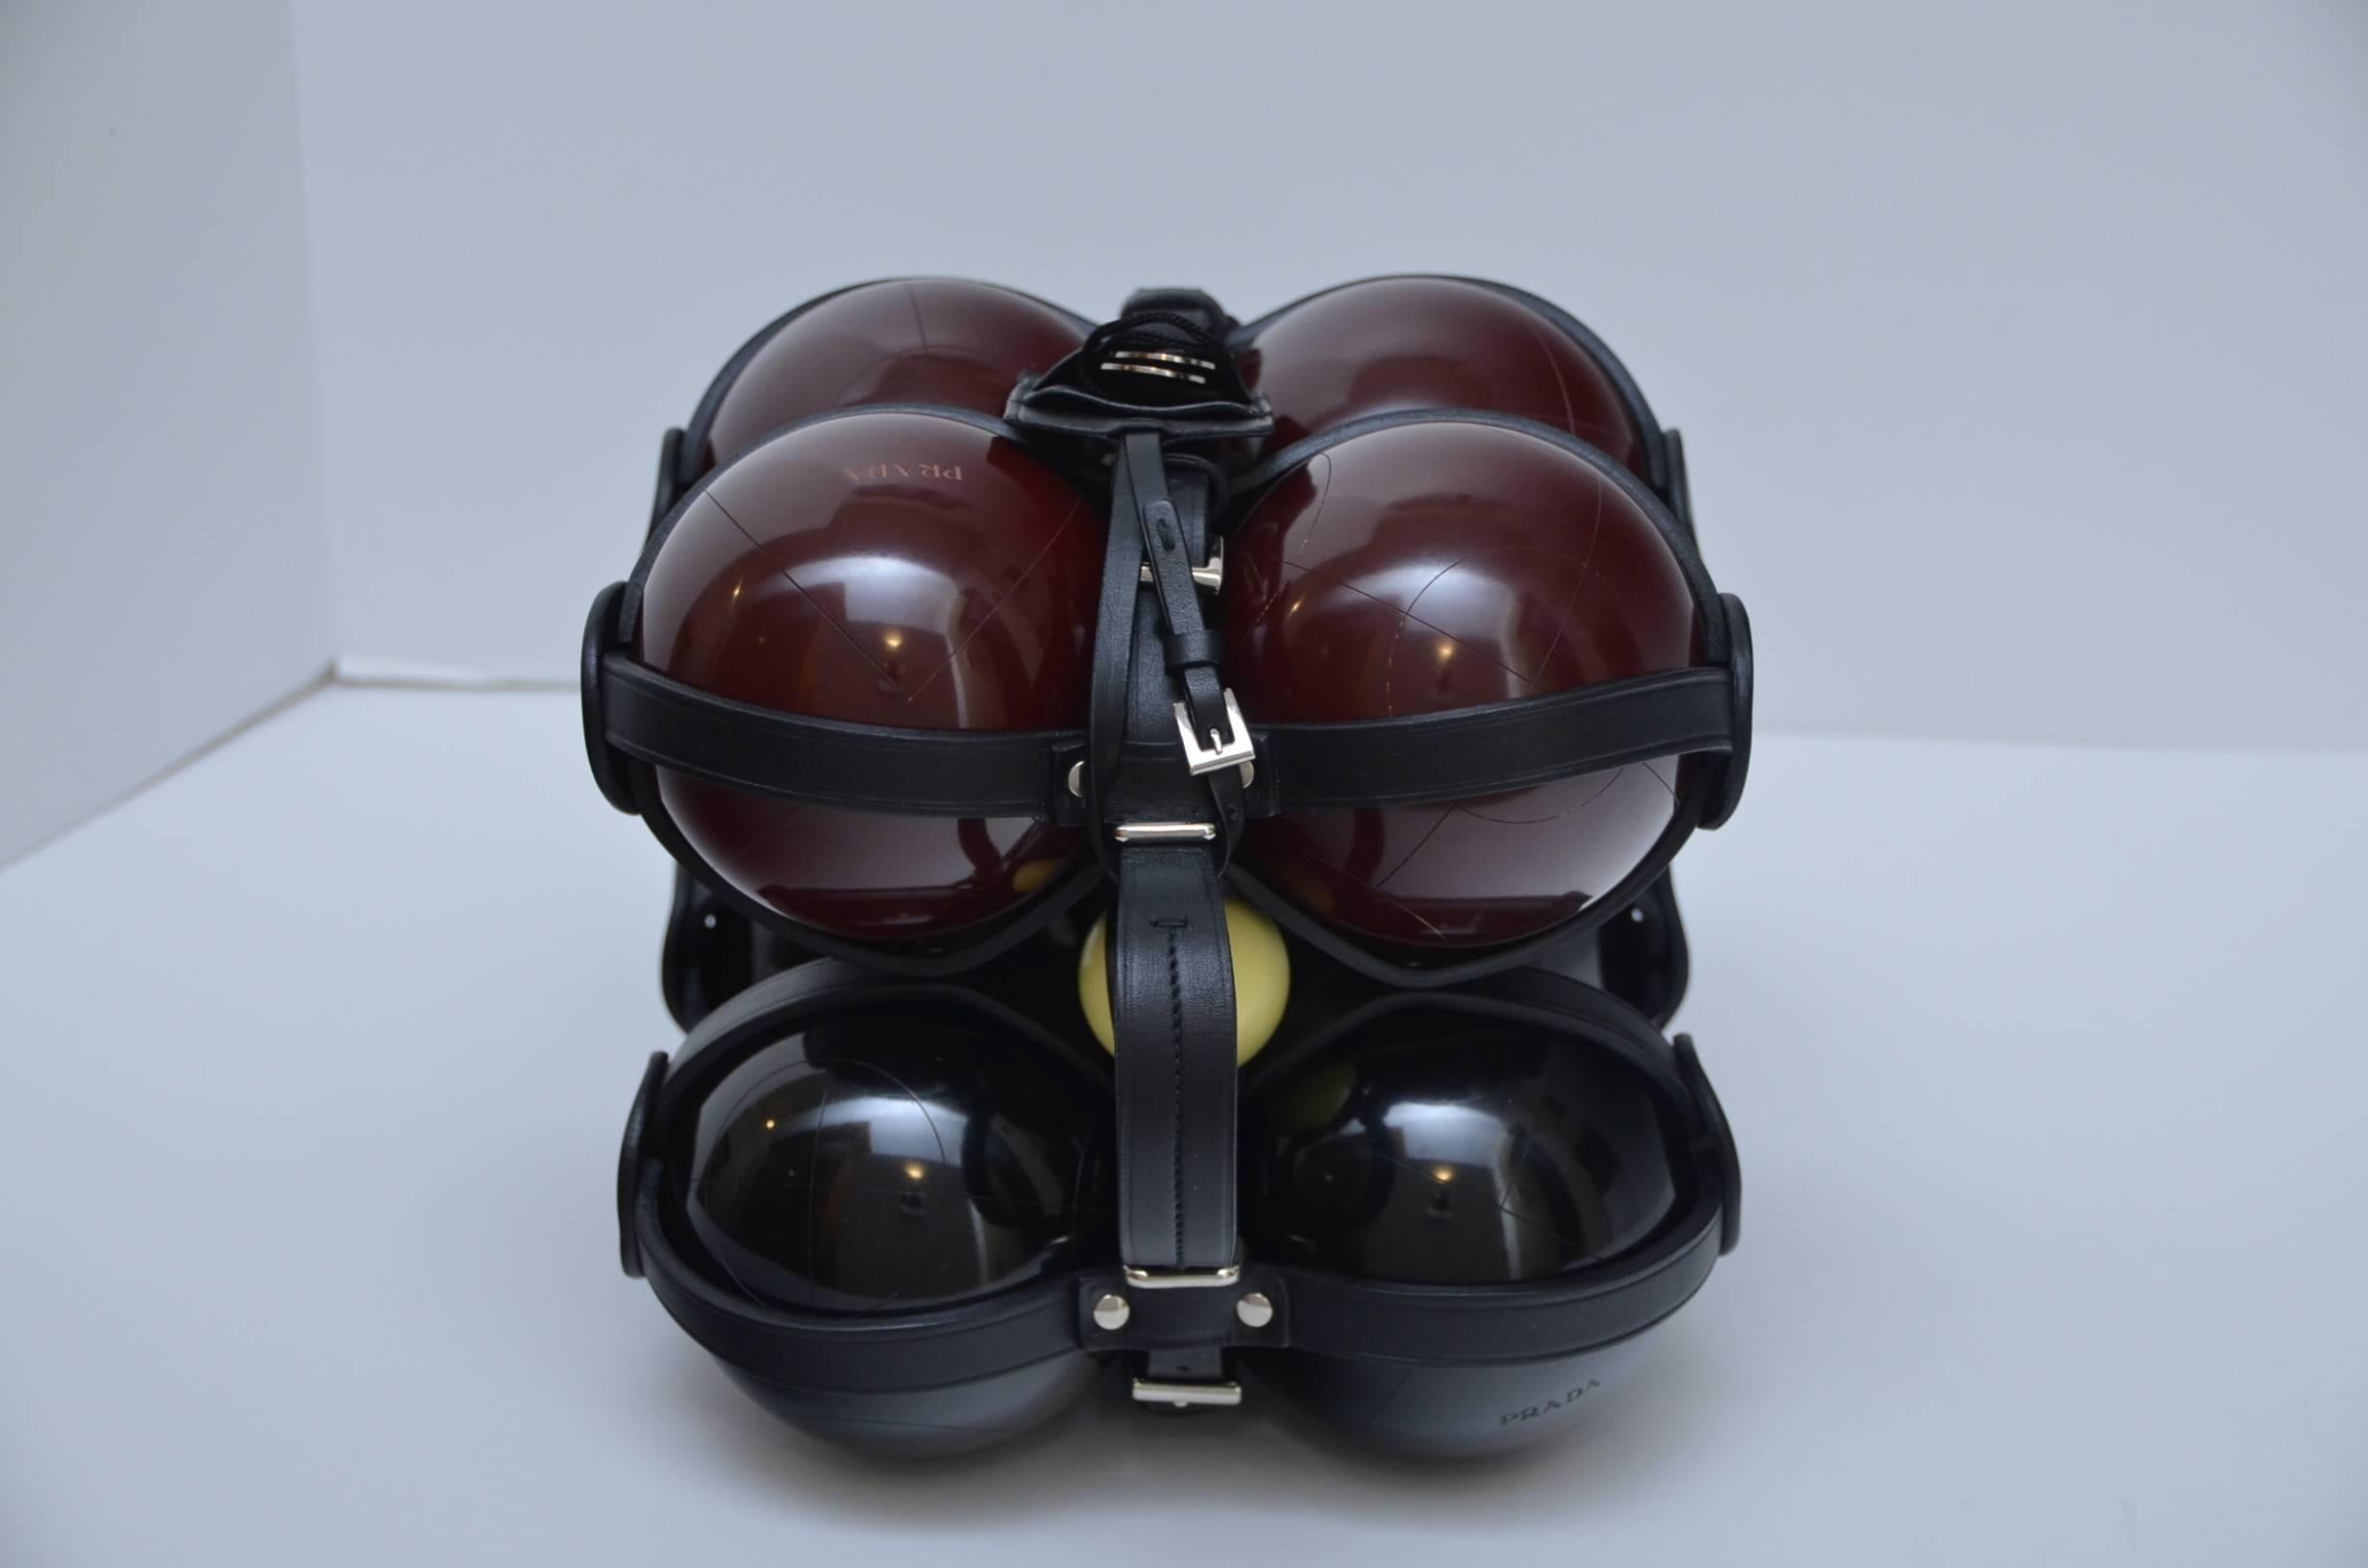 Prada bocce ball set in leather straps.
4 black and 4 maroone balls with PRADA logo embossed on some balls.
Tag and original box included.
Box show little damage from storage but set is brand new.
Very heavy.
Made in Italy.

FINAL SALE.

